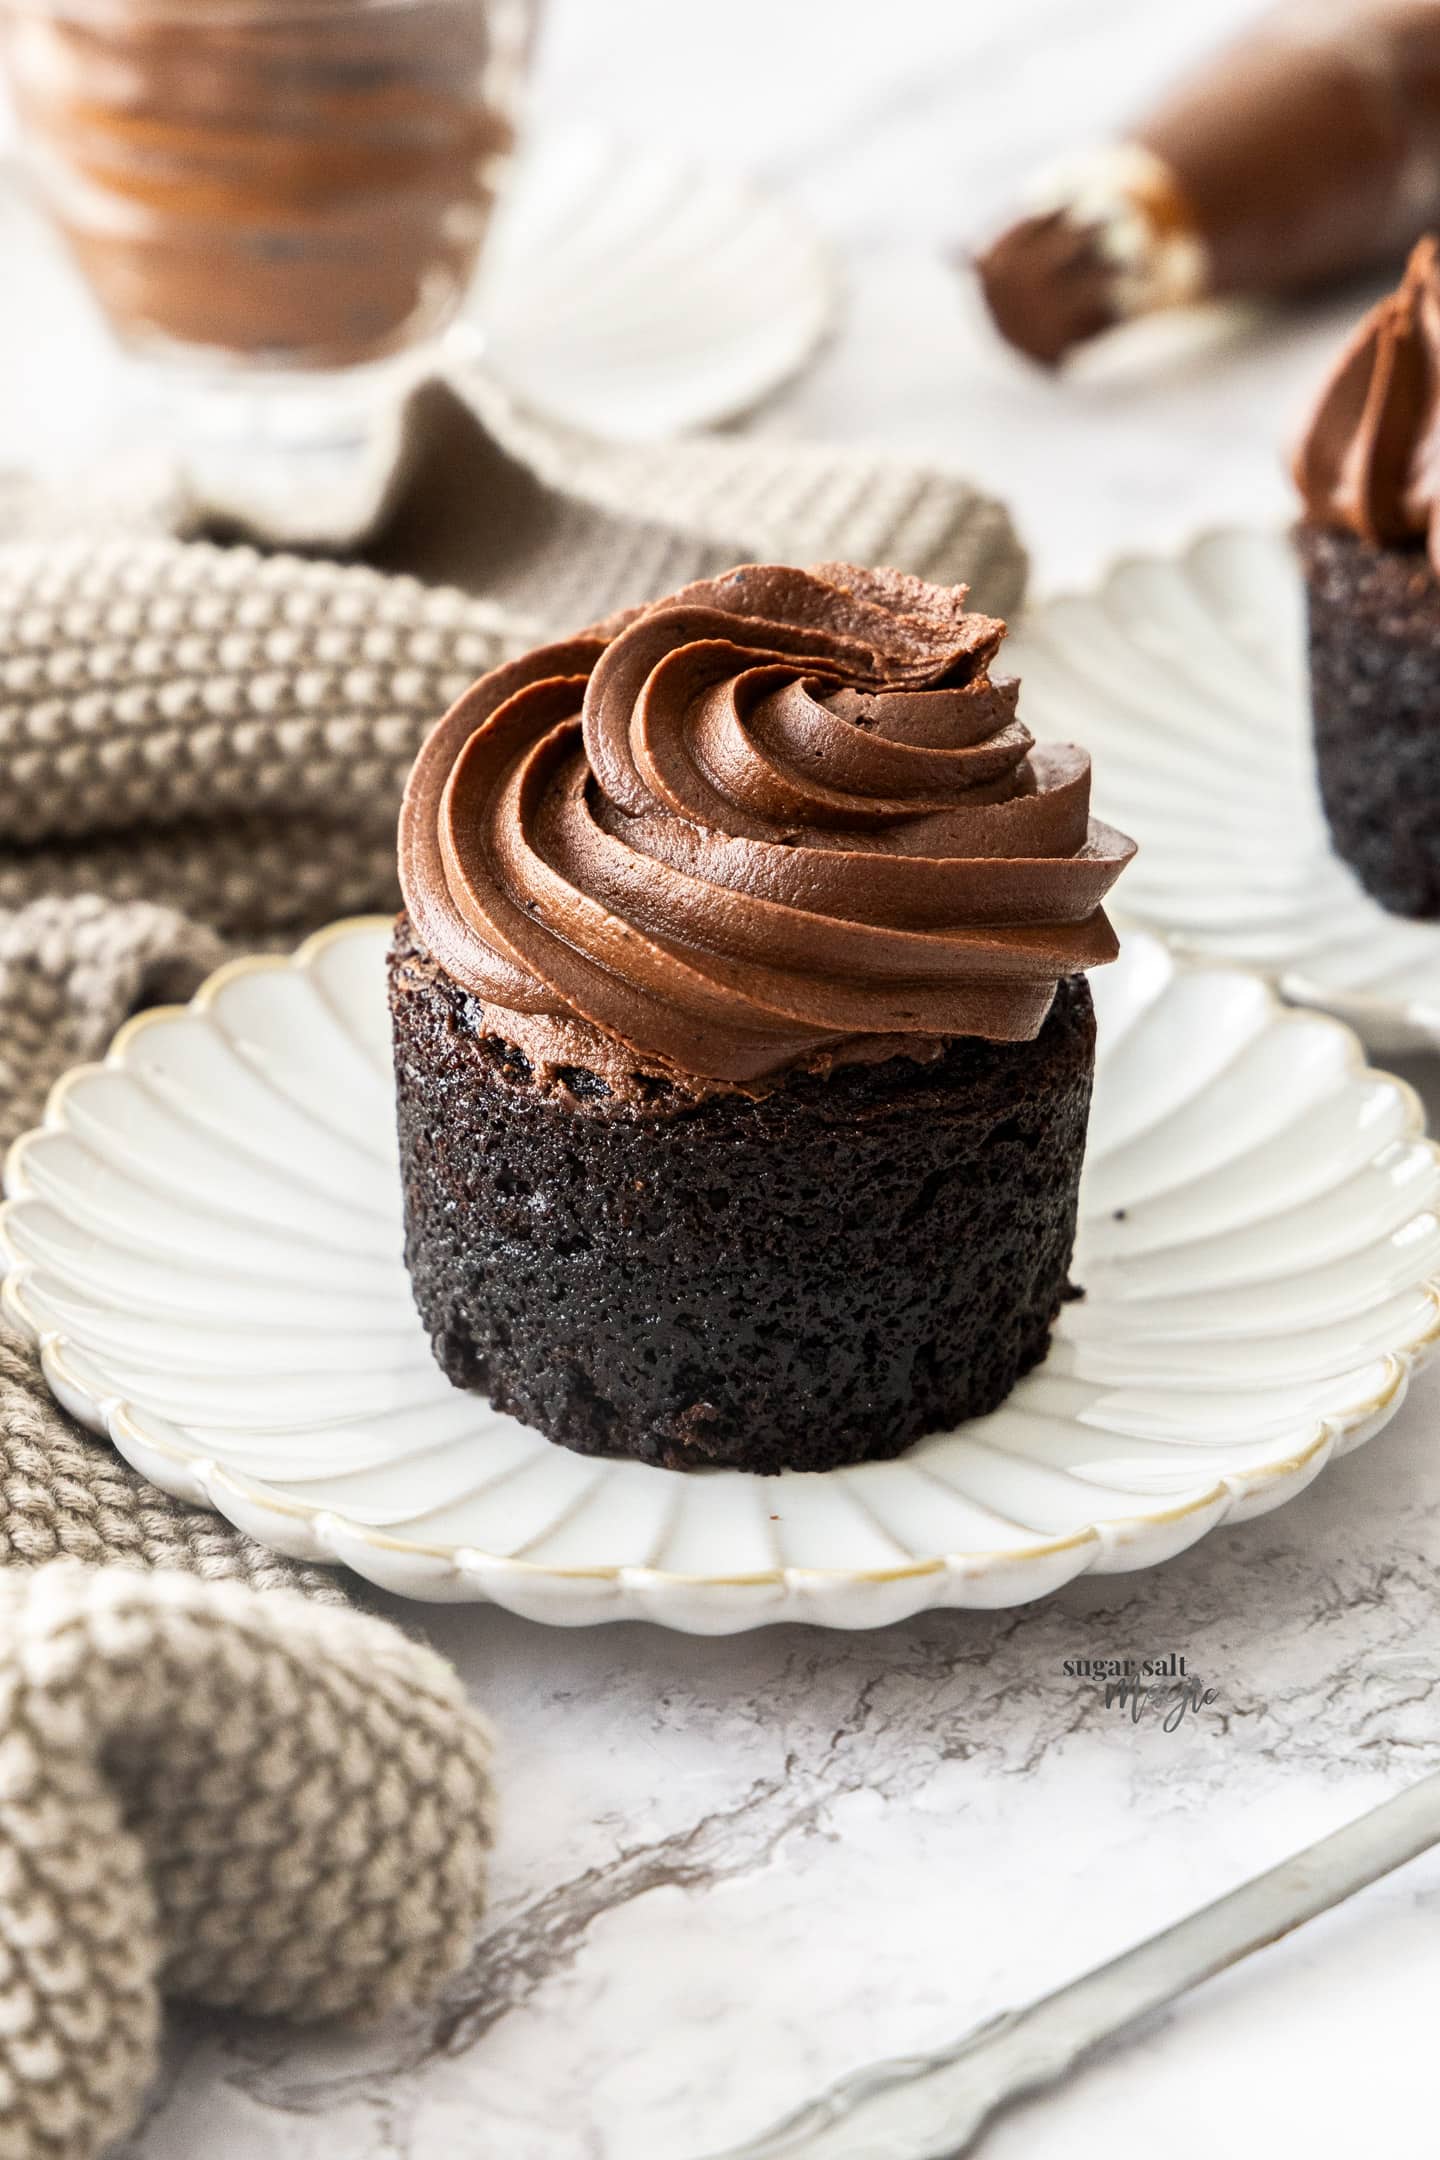 A cake topped with chocolate fudge frosting.